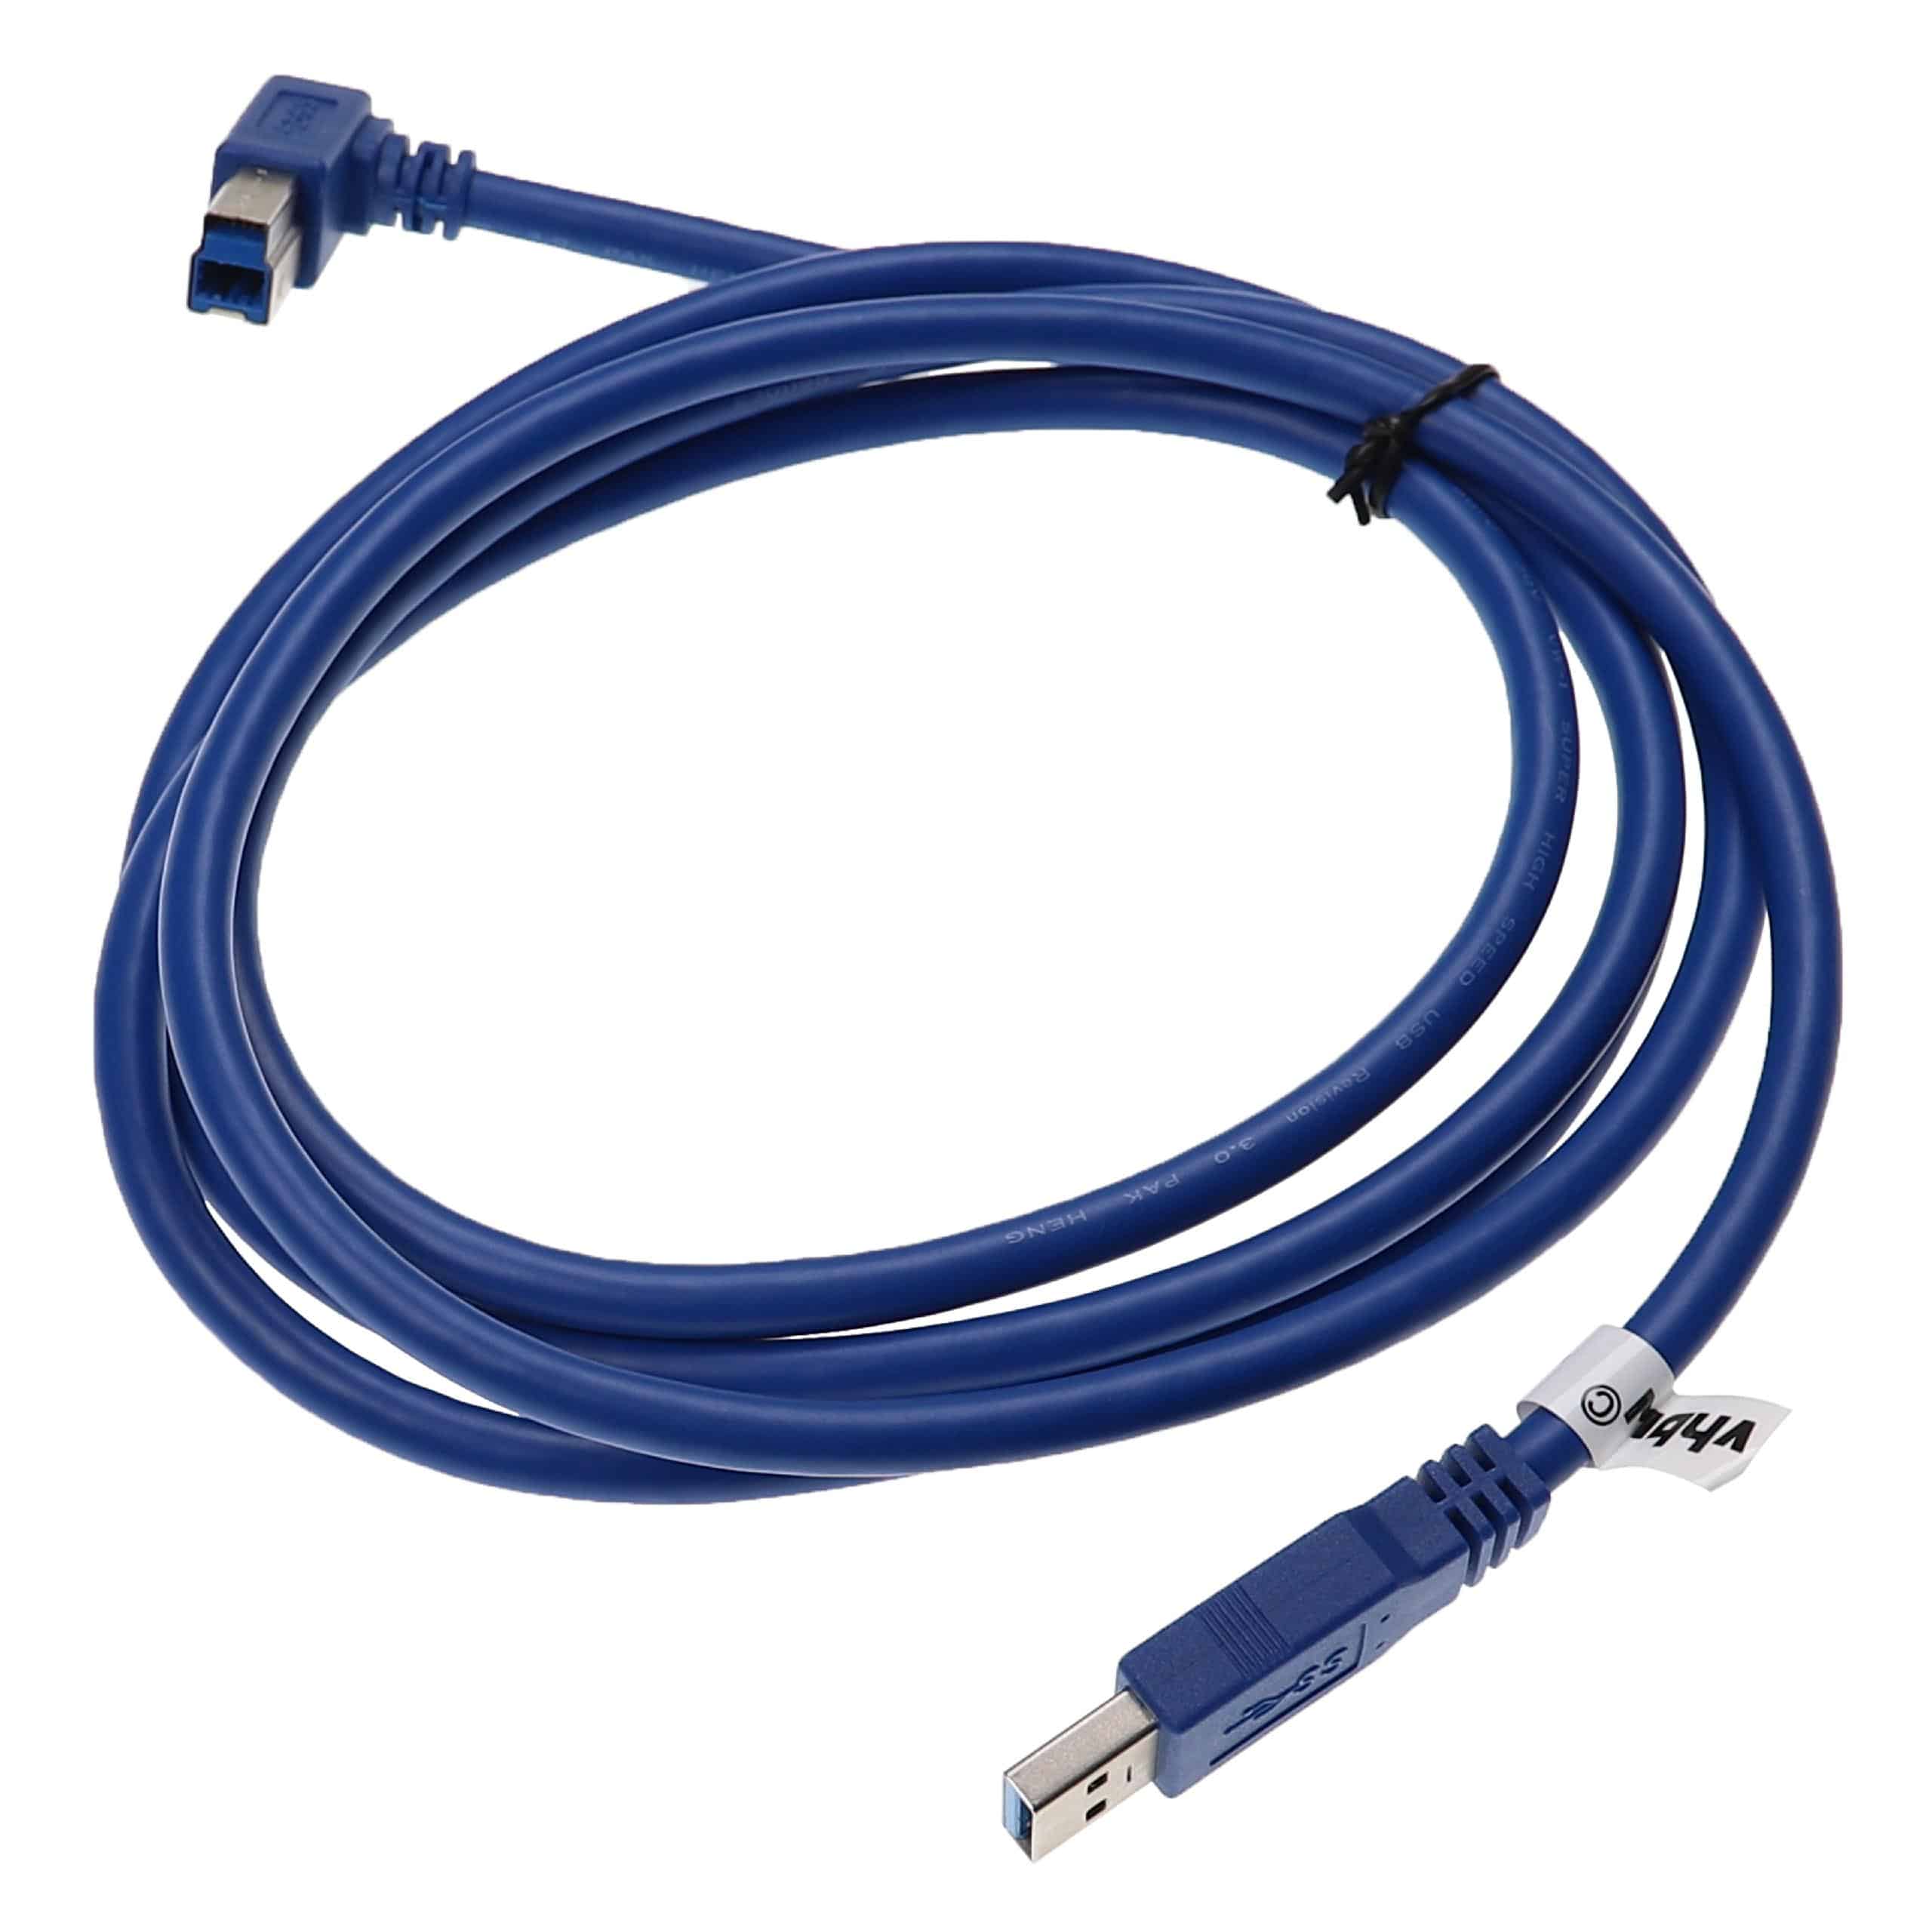 USB 3.0 Cable Type A to Type B - USB Data Cable 1.8 m, Blue